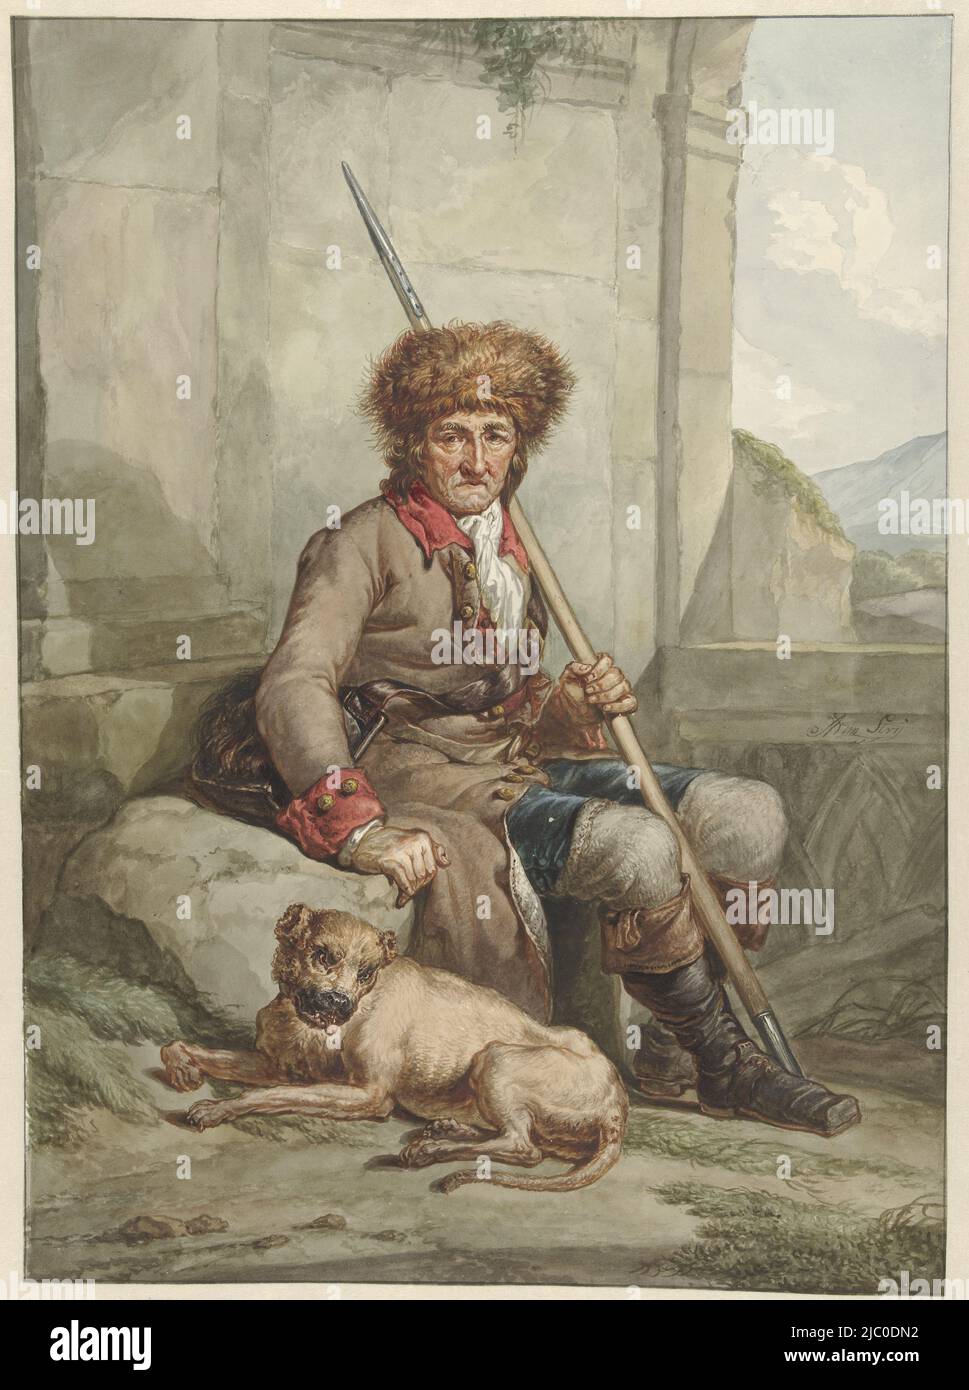 Sitting hunter with fur hat, spear and weitas, with dog, in the background a mountain landscape, Sitting hunter with fur hat, spear and weitas, draughtsman: Abraham van Strij (I), (mentioned on object), 1763 - 1826, paper, pen, brush, h 451 mm × w 325 mm Stock Photo